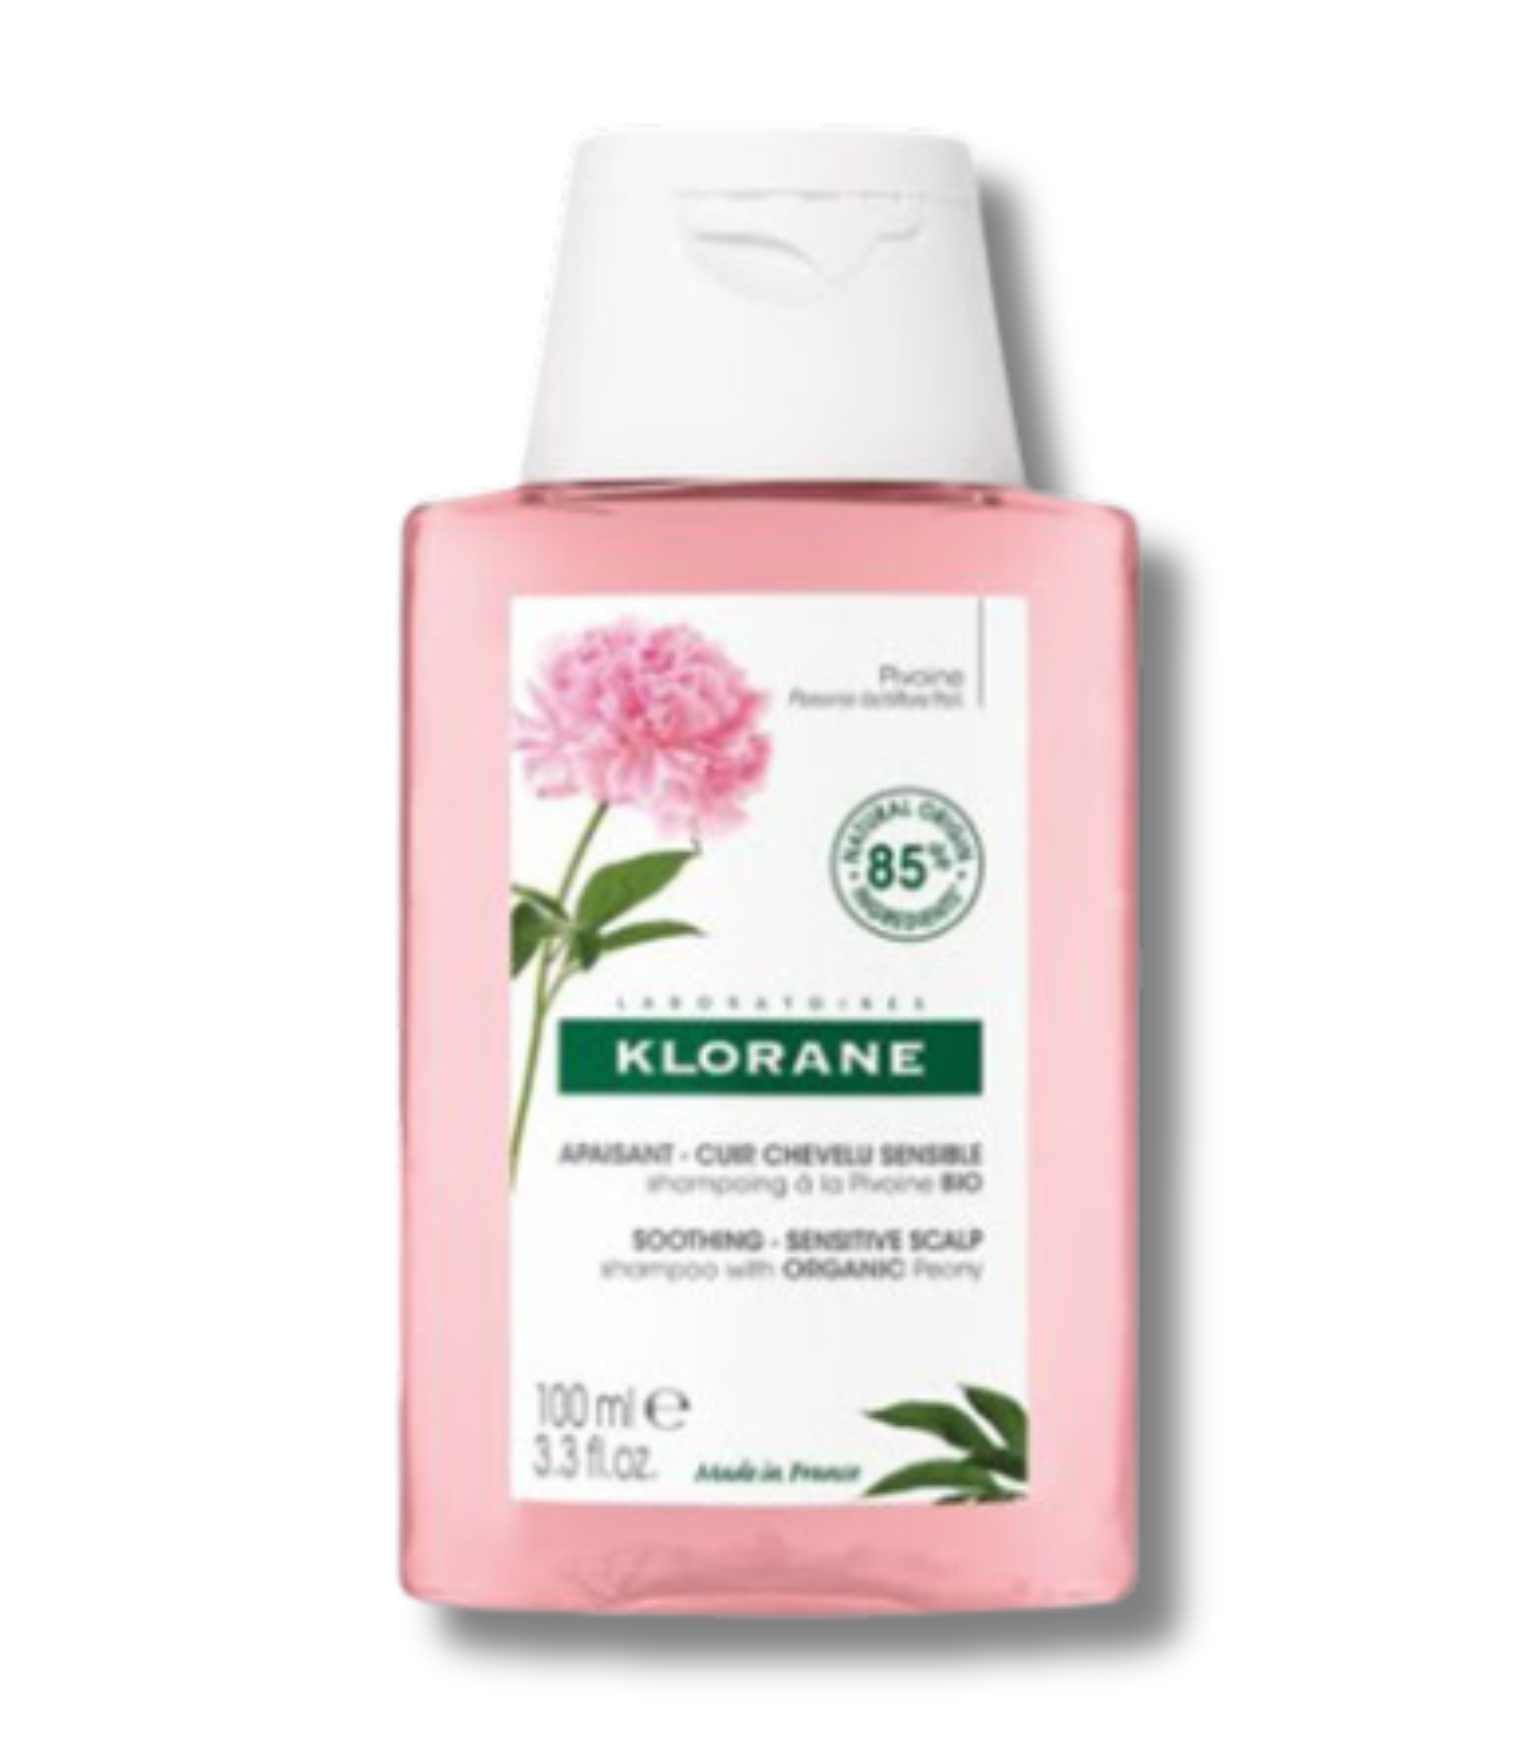 Shampoo with Organic Peony 100ml when you buy 2 products from Klorane - French Beauty Co.